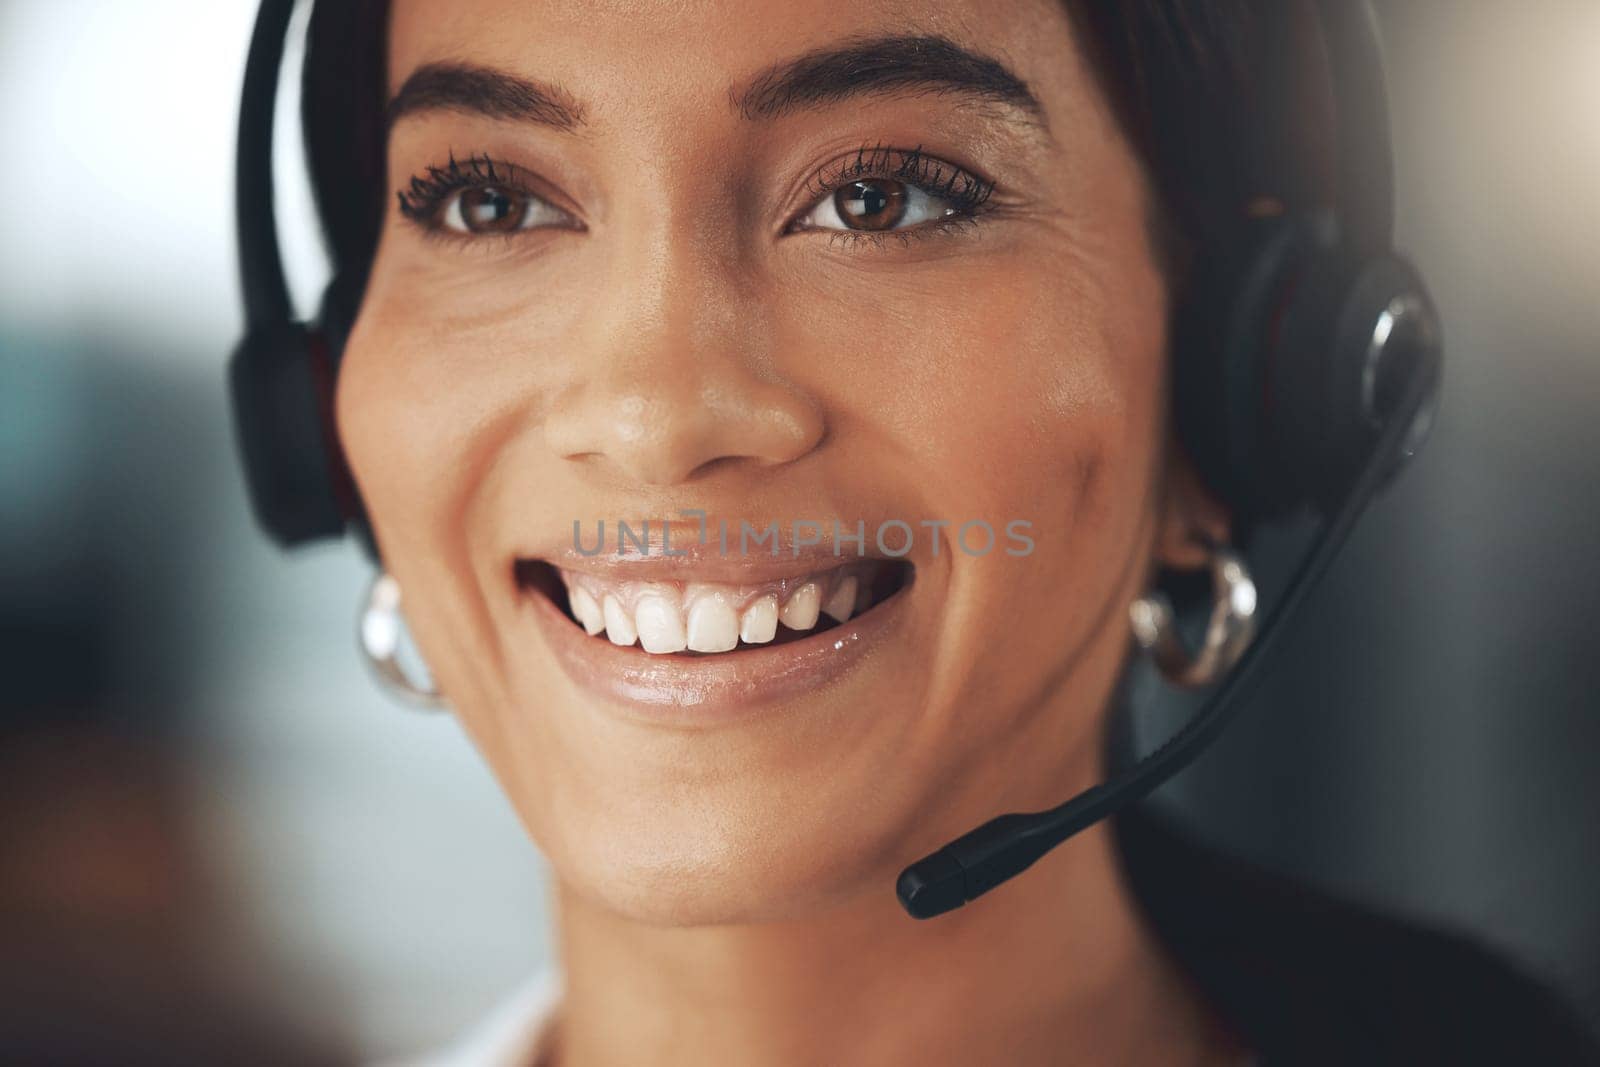 Call center, smile and vision with woman consultant in telemarketing office for help or sales. Contact us, face and headset with happy person in workplace for consulting, customer service or support by YuriArcurs